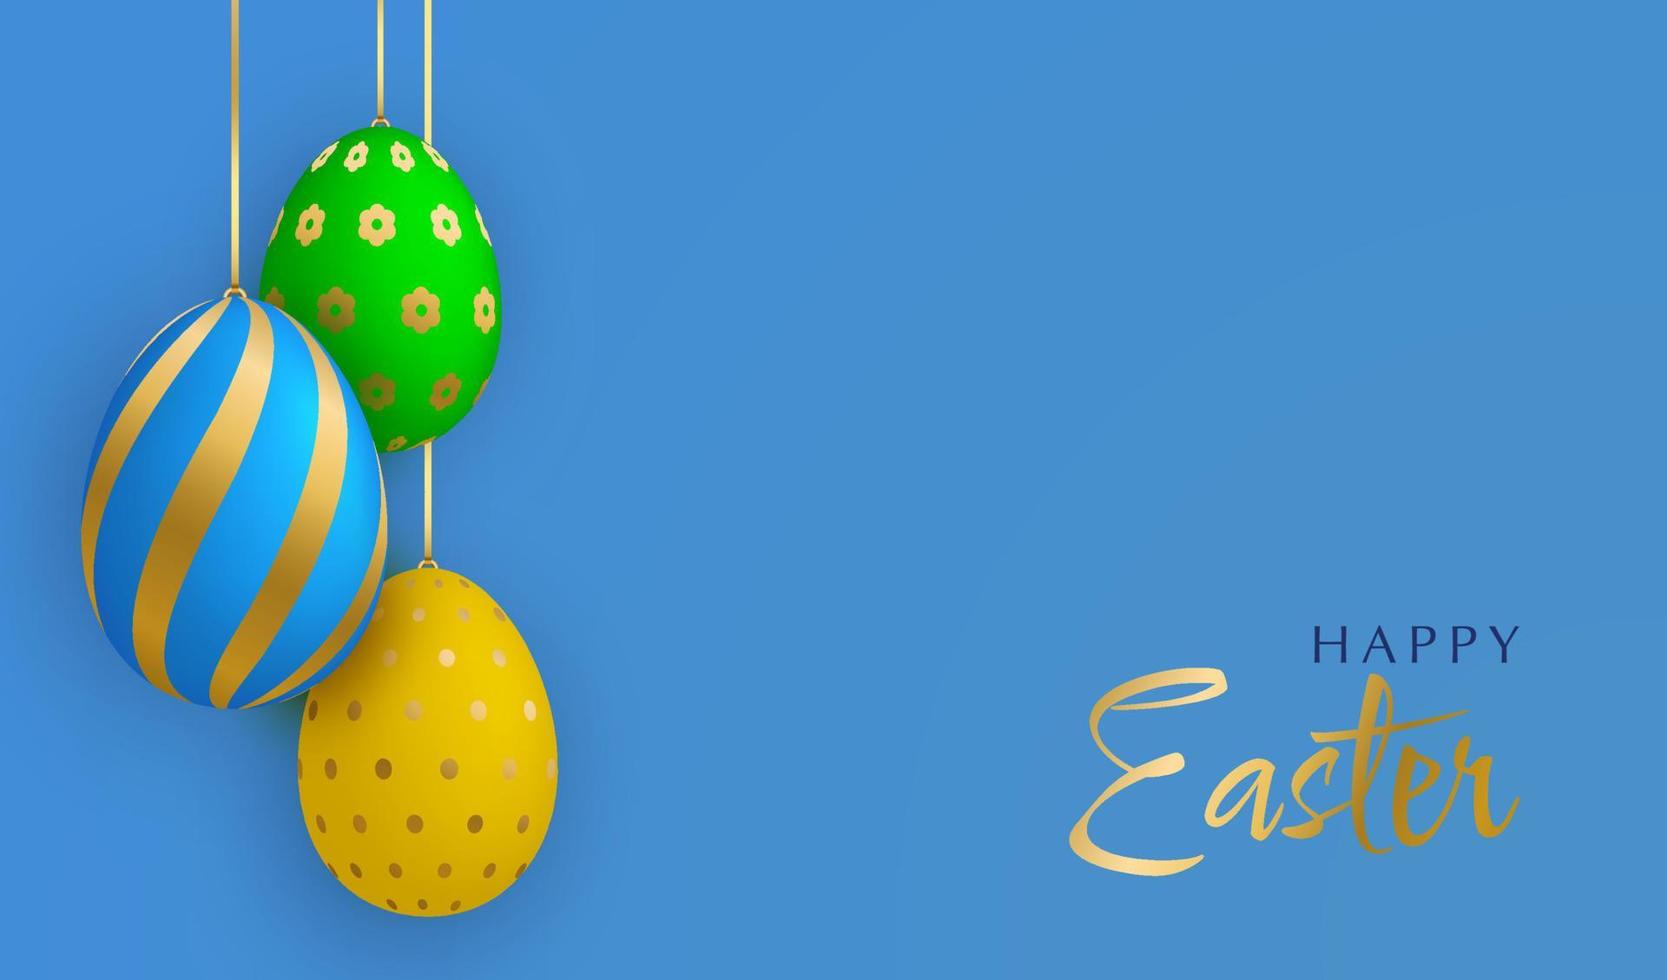 Happy Easter greeting card. Cute 3D eggs hanging on ribbons on blue background. vector